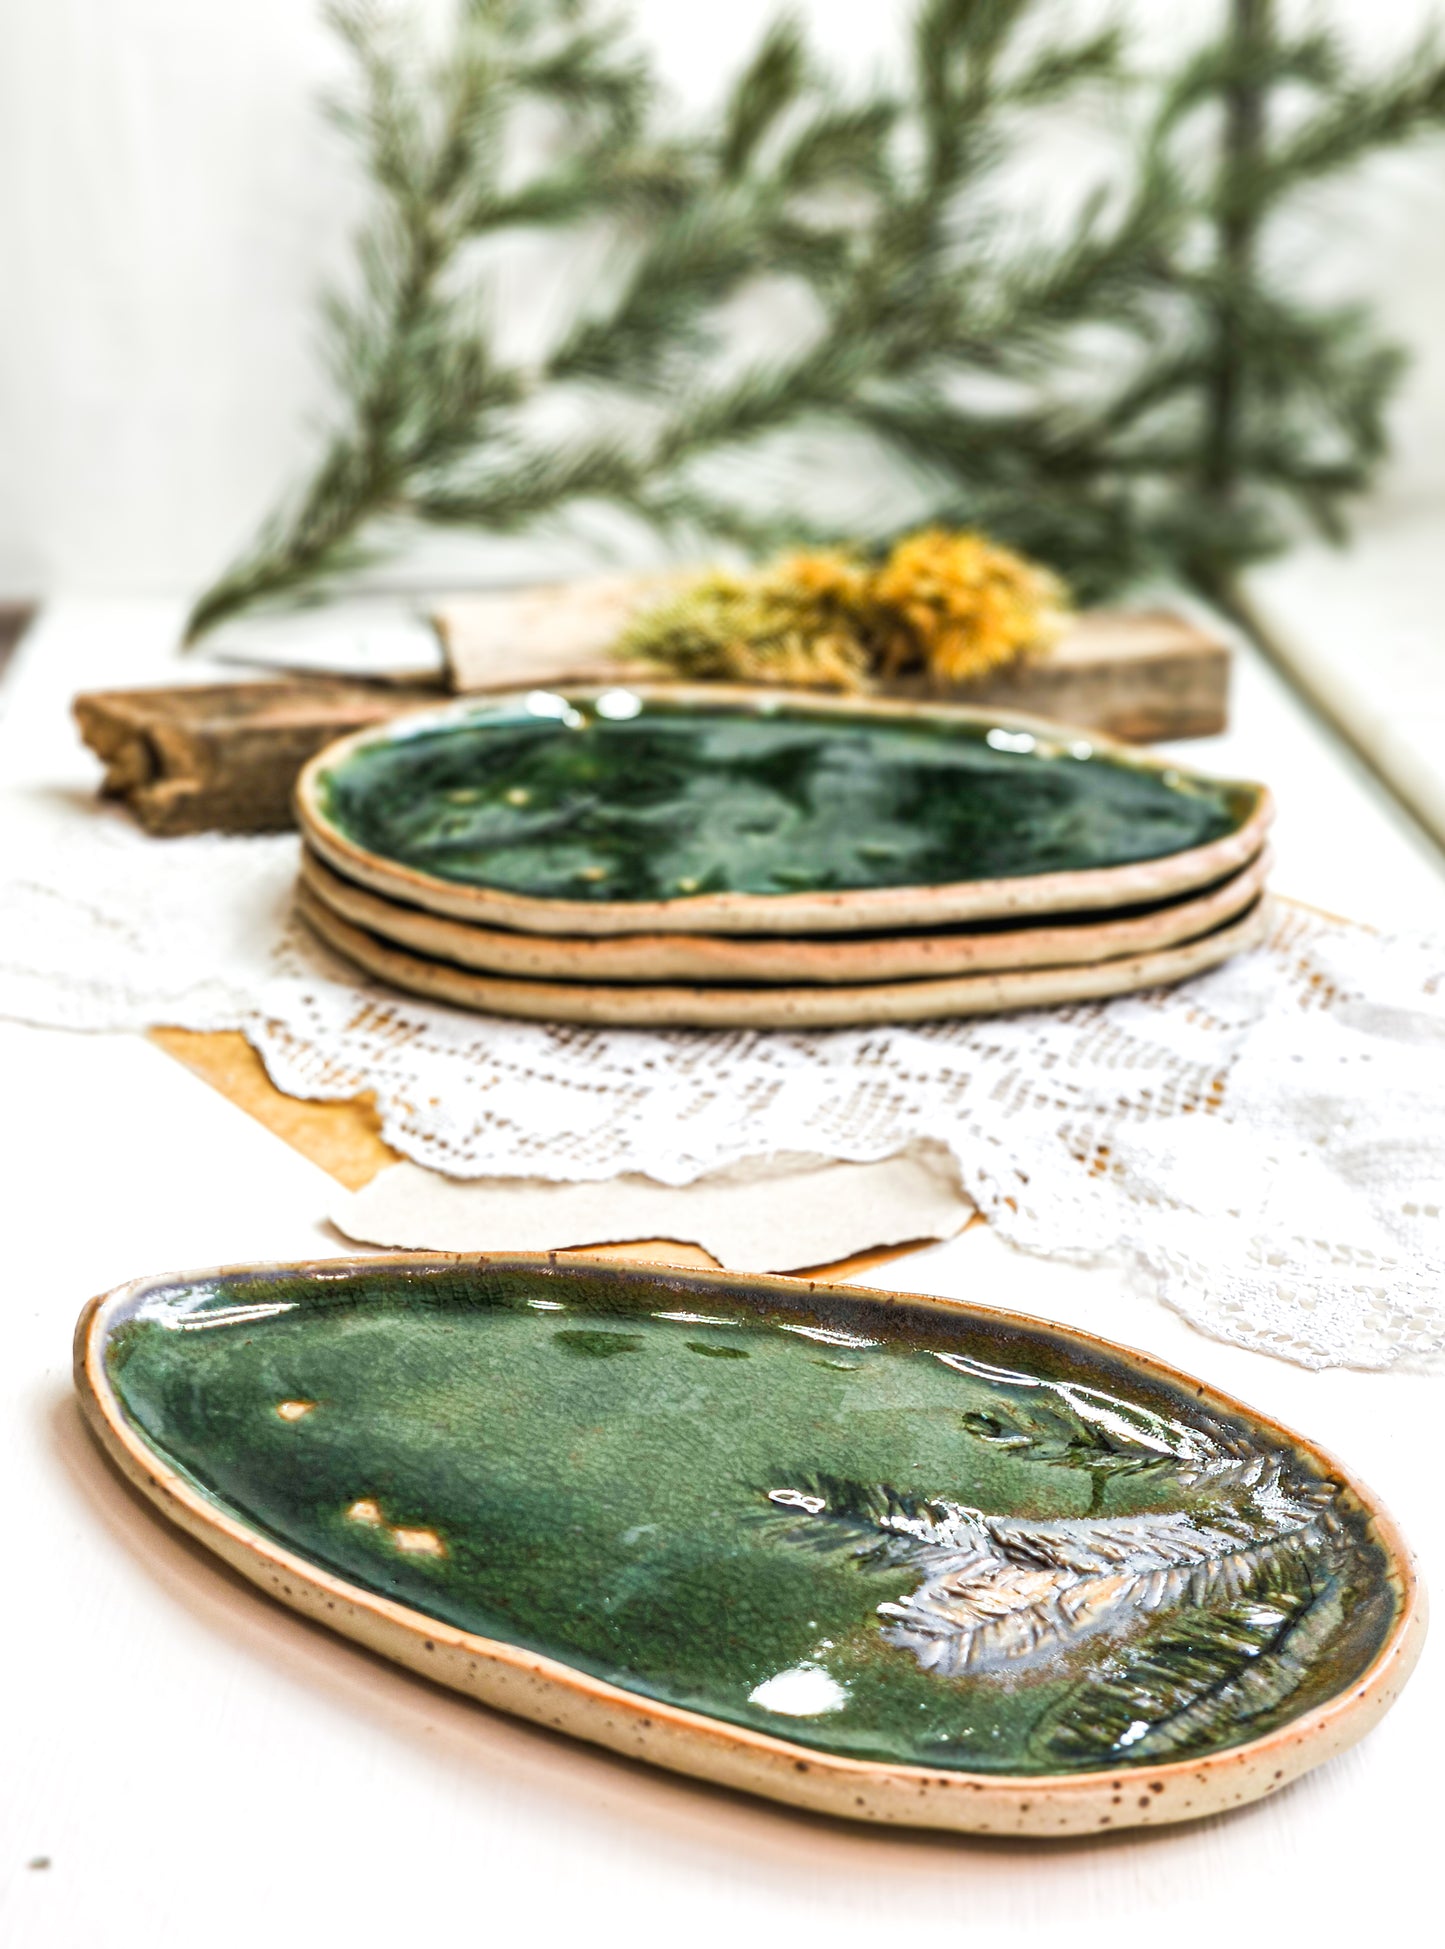 Plate with pine-tree